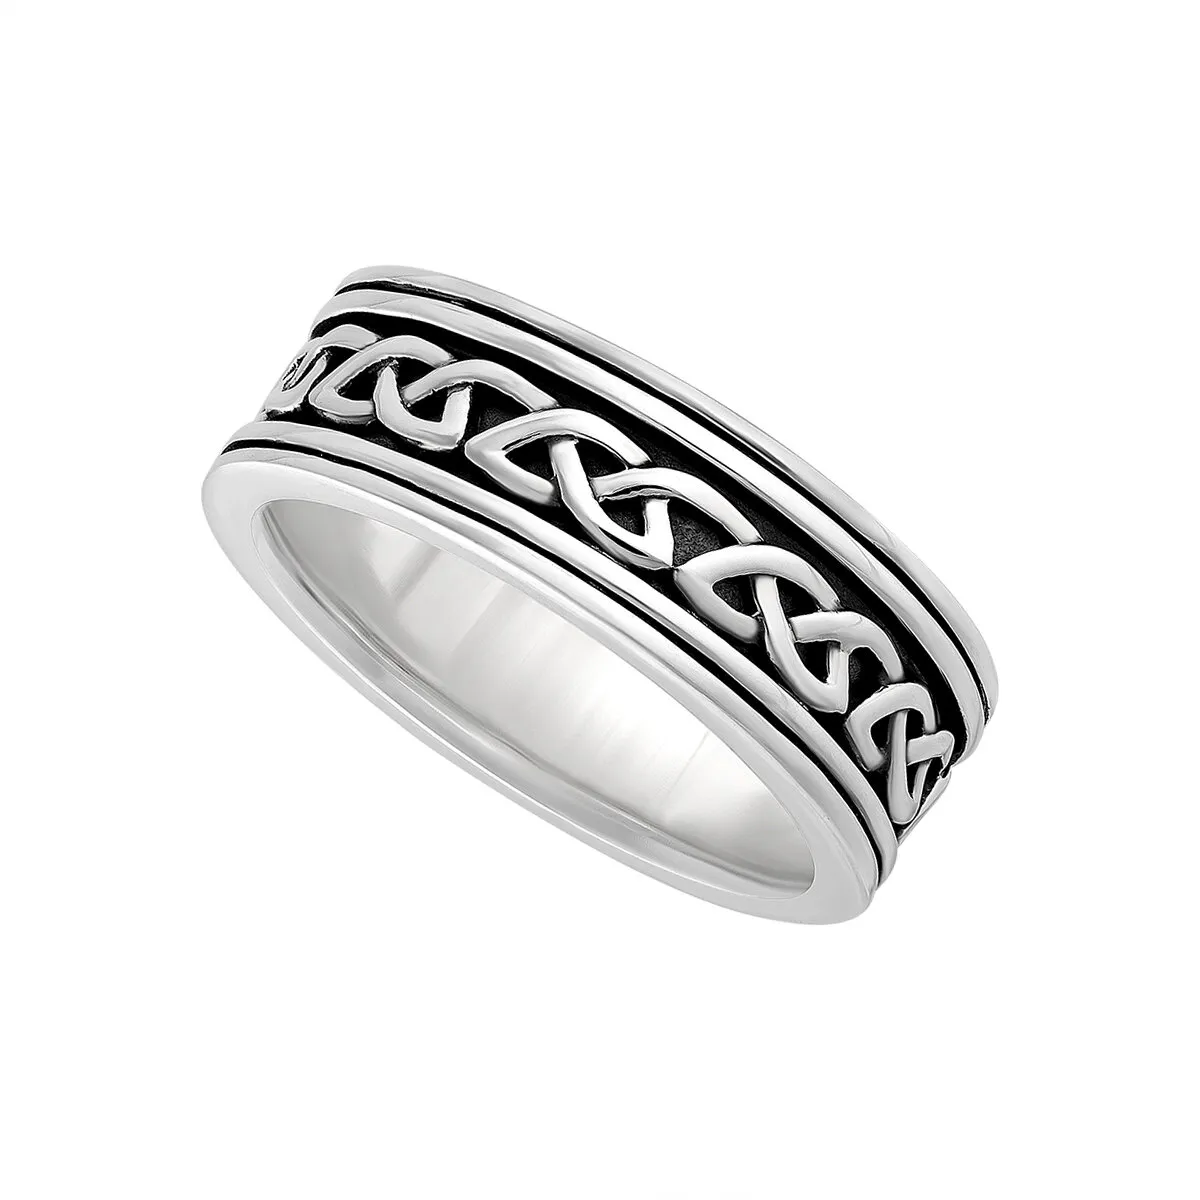 Oxidized Sterling Silver Mens Celtic Ring...